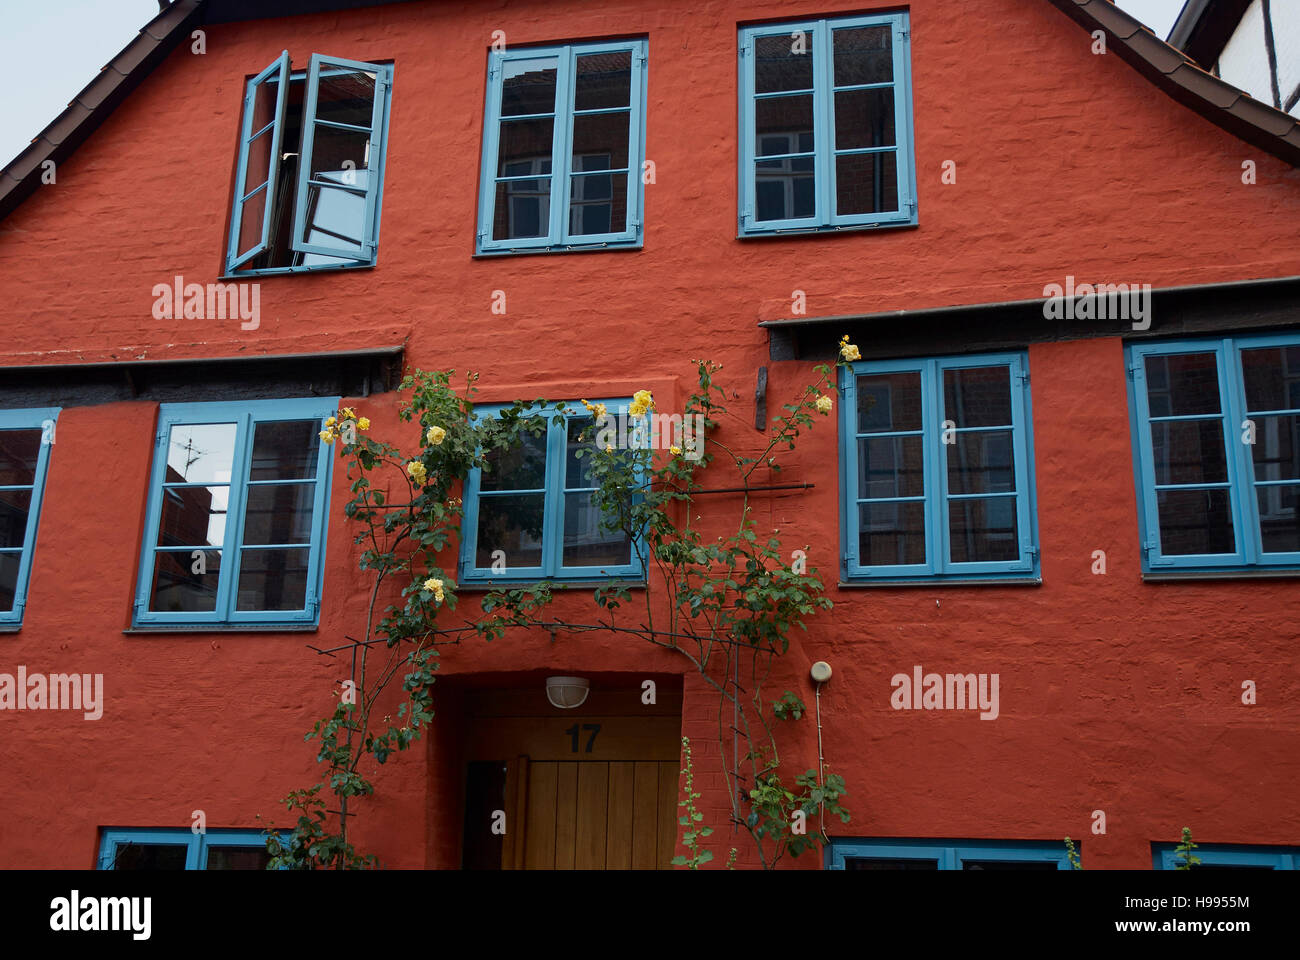 Nicely decorated house in the historical city center of the old Hansestadt Lüneburg, Germany Stock Photo